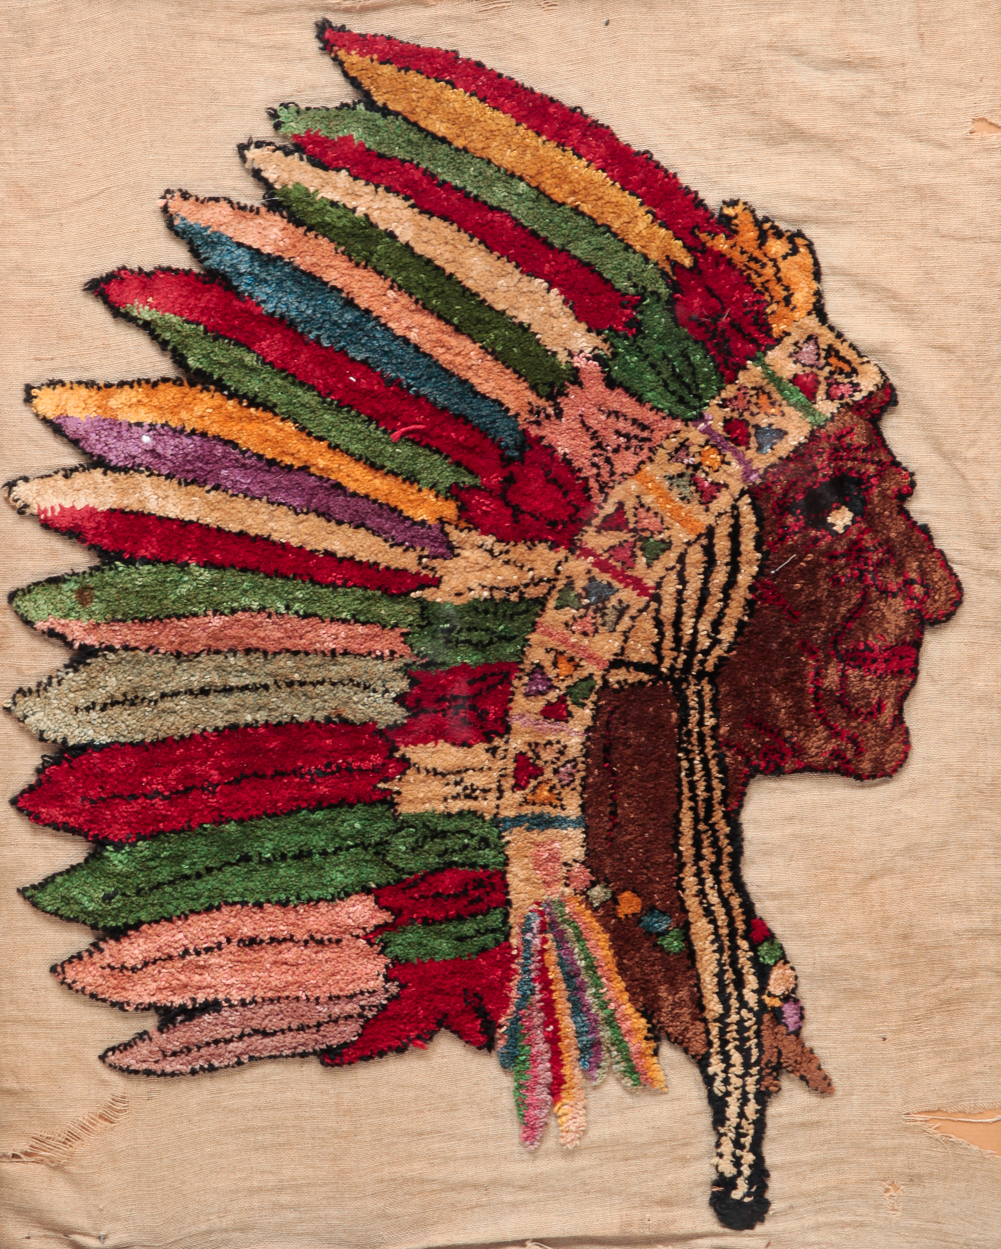 TEXTILE PANEL OF NATIVE AMERICAN